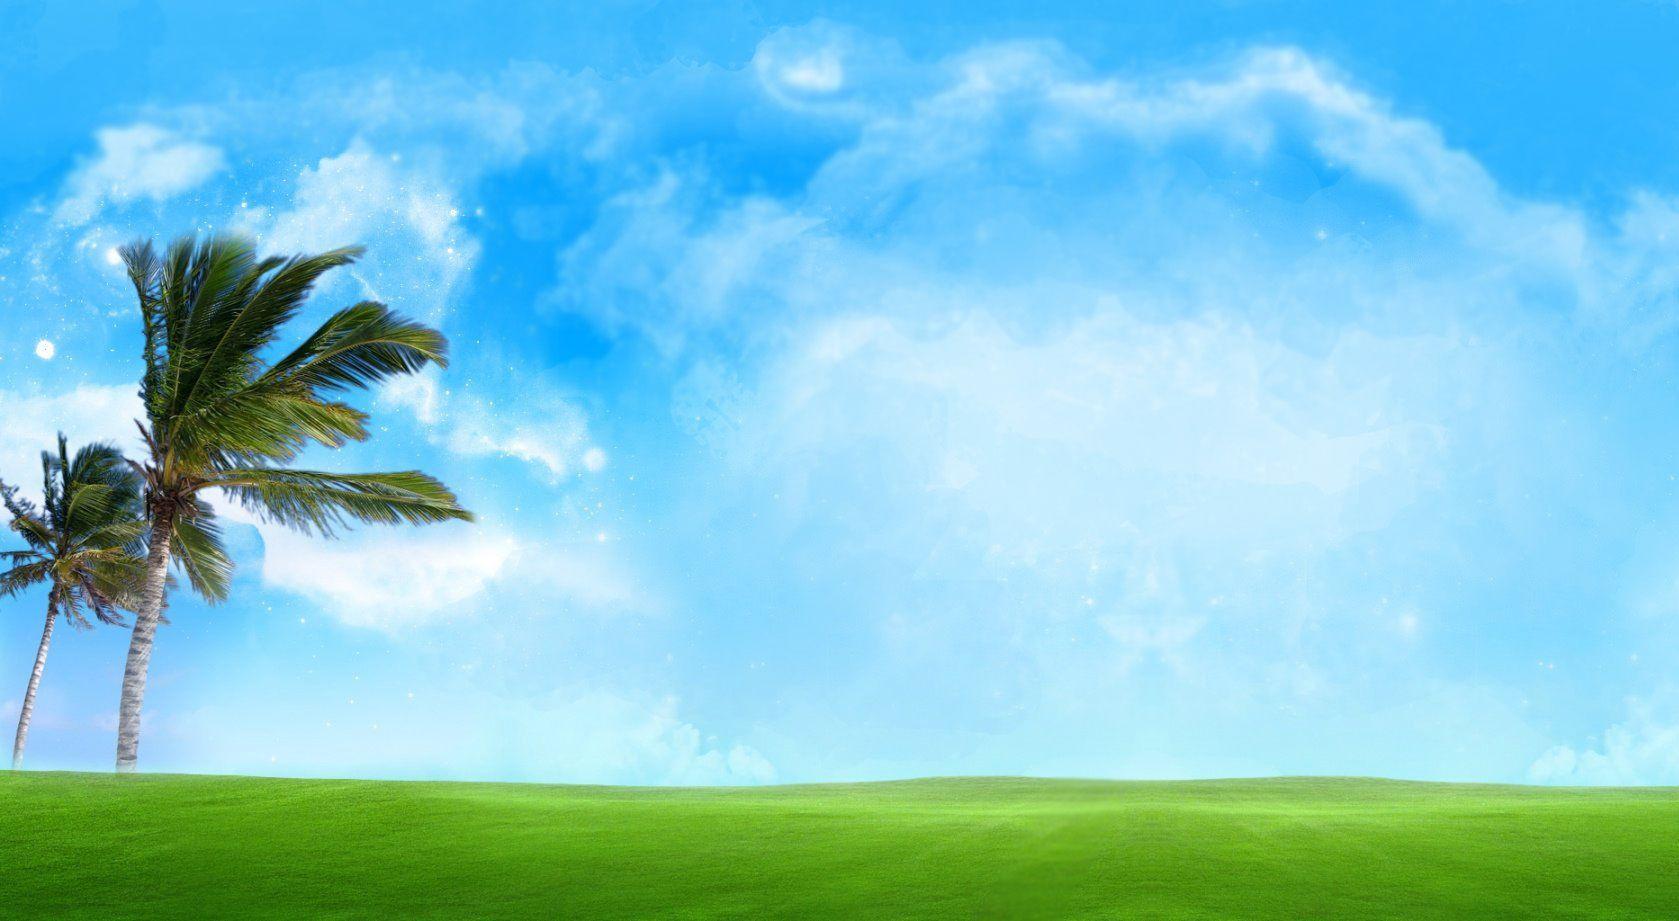 Blue Sky Wallpapers - Top Free Blue Sky Backgrounds ...